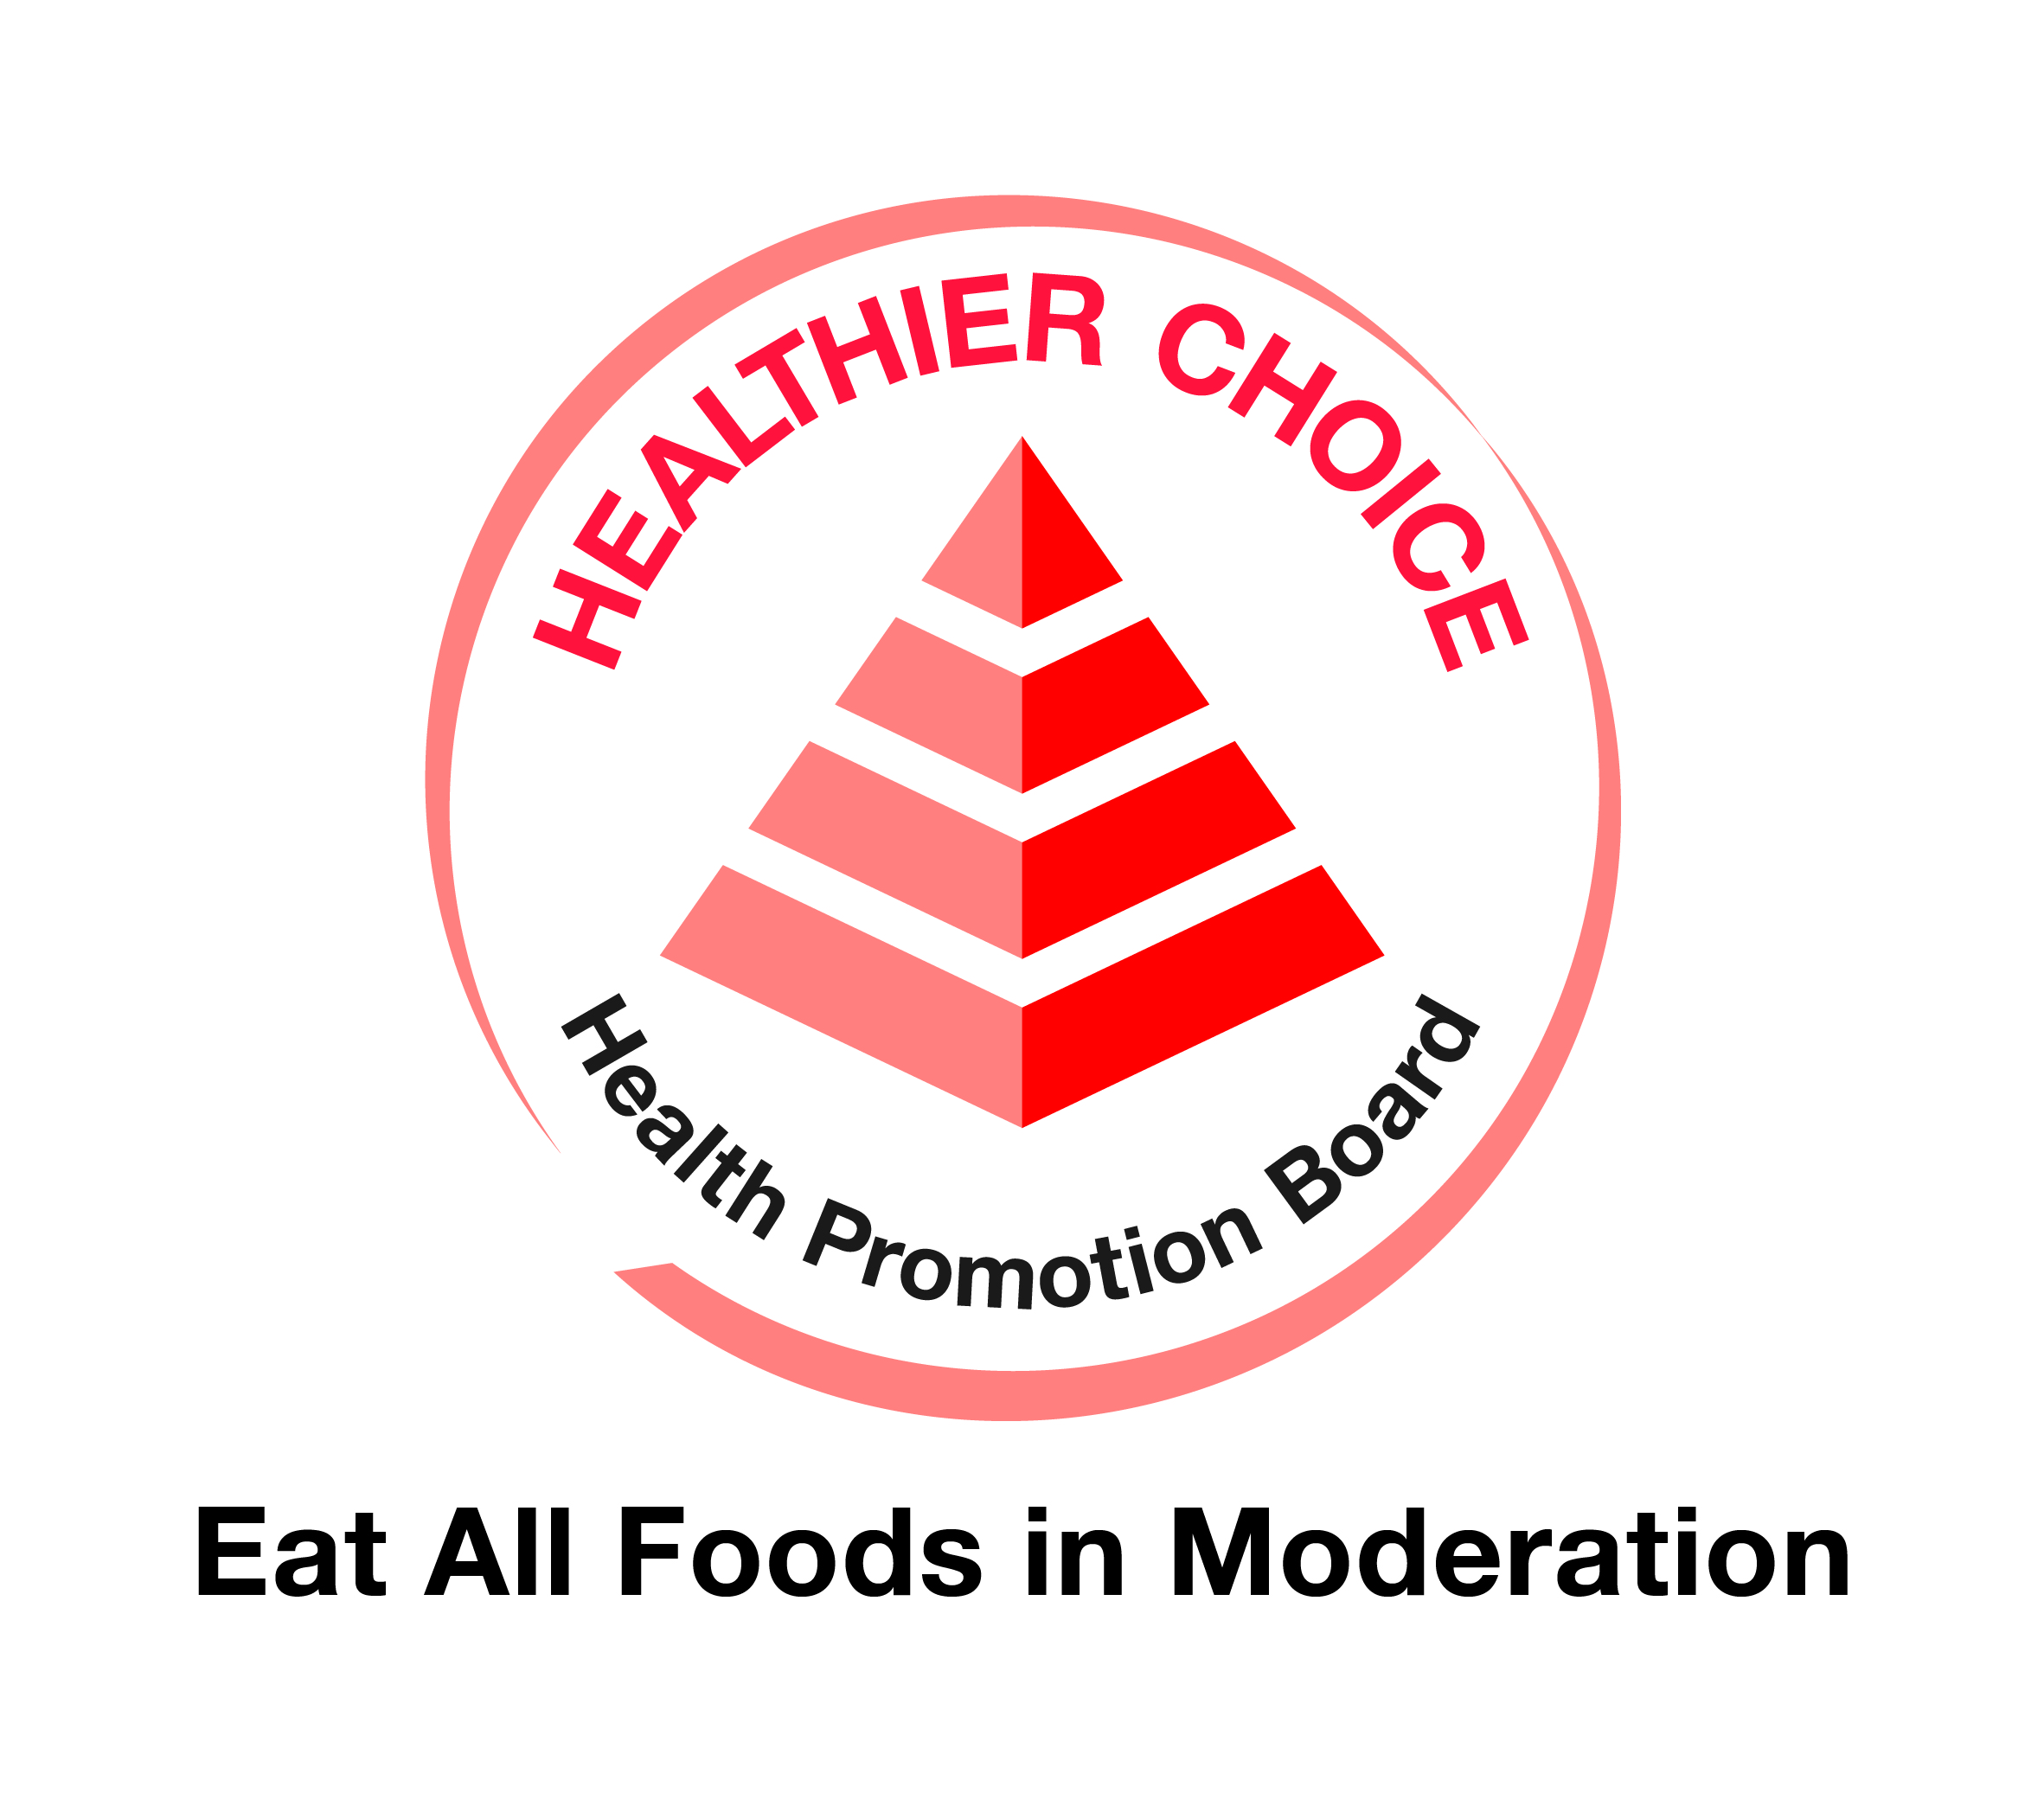 Food packaging with the healthier choice label adhere to a balanced diet.